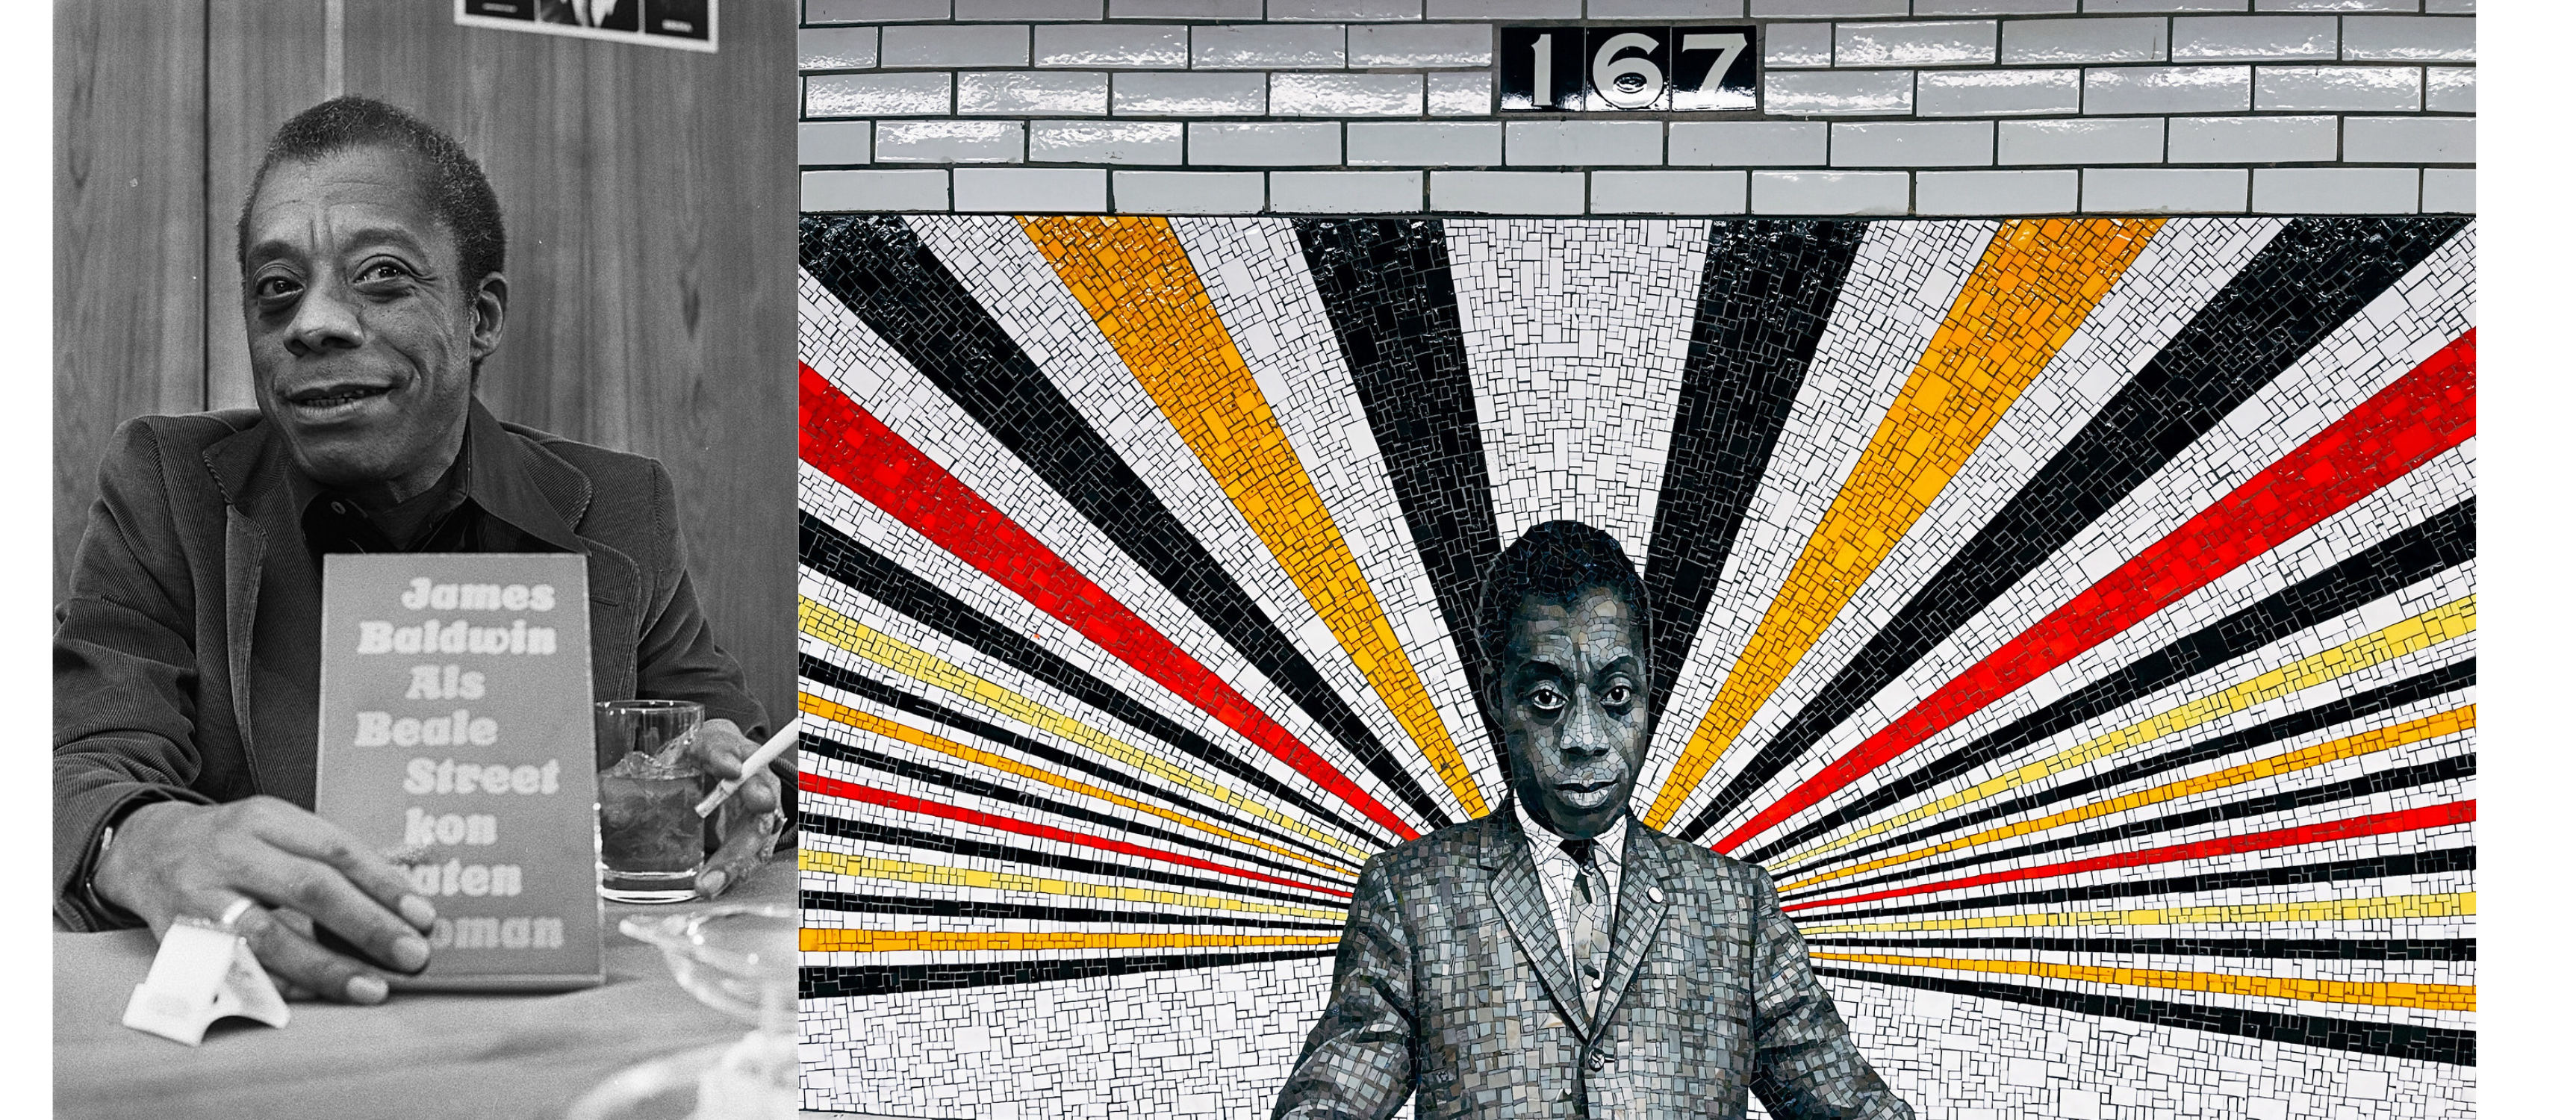 Baldwin holding book If Beale Street Could Talk; Mural with black, red, and yellow tiles extending outward behind him